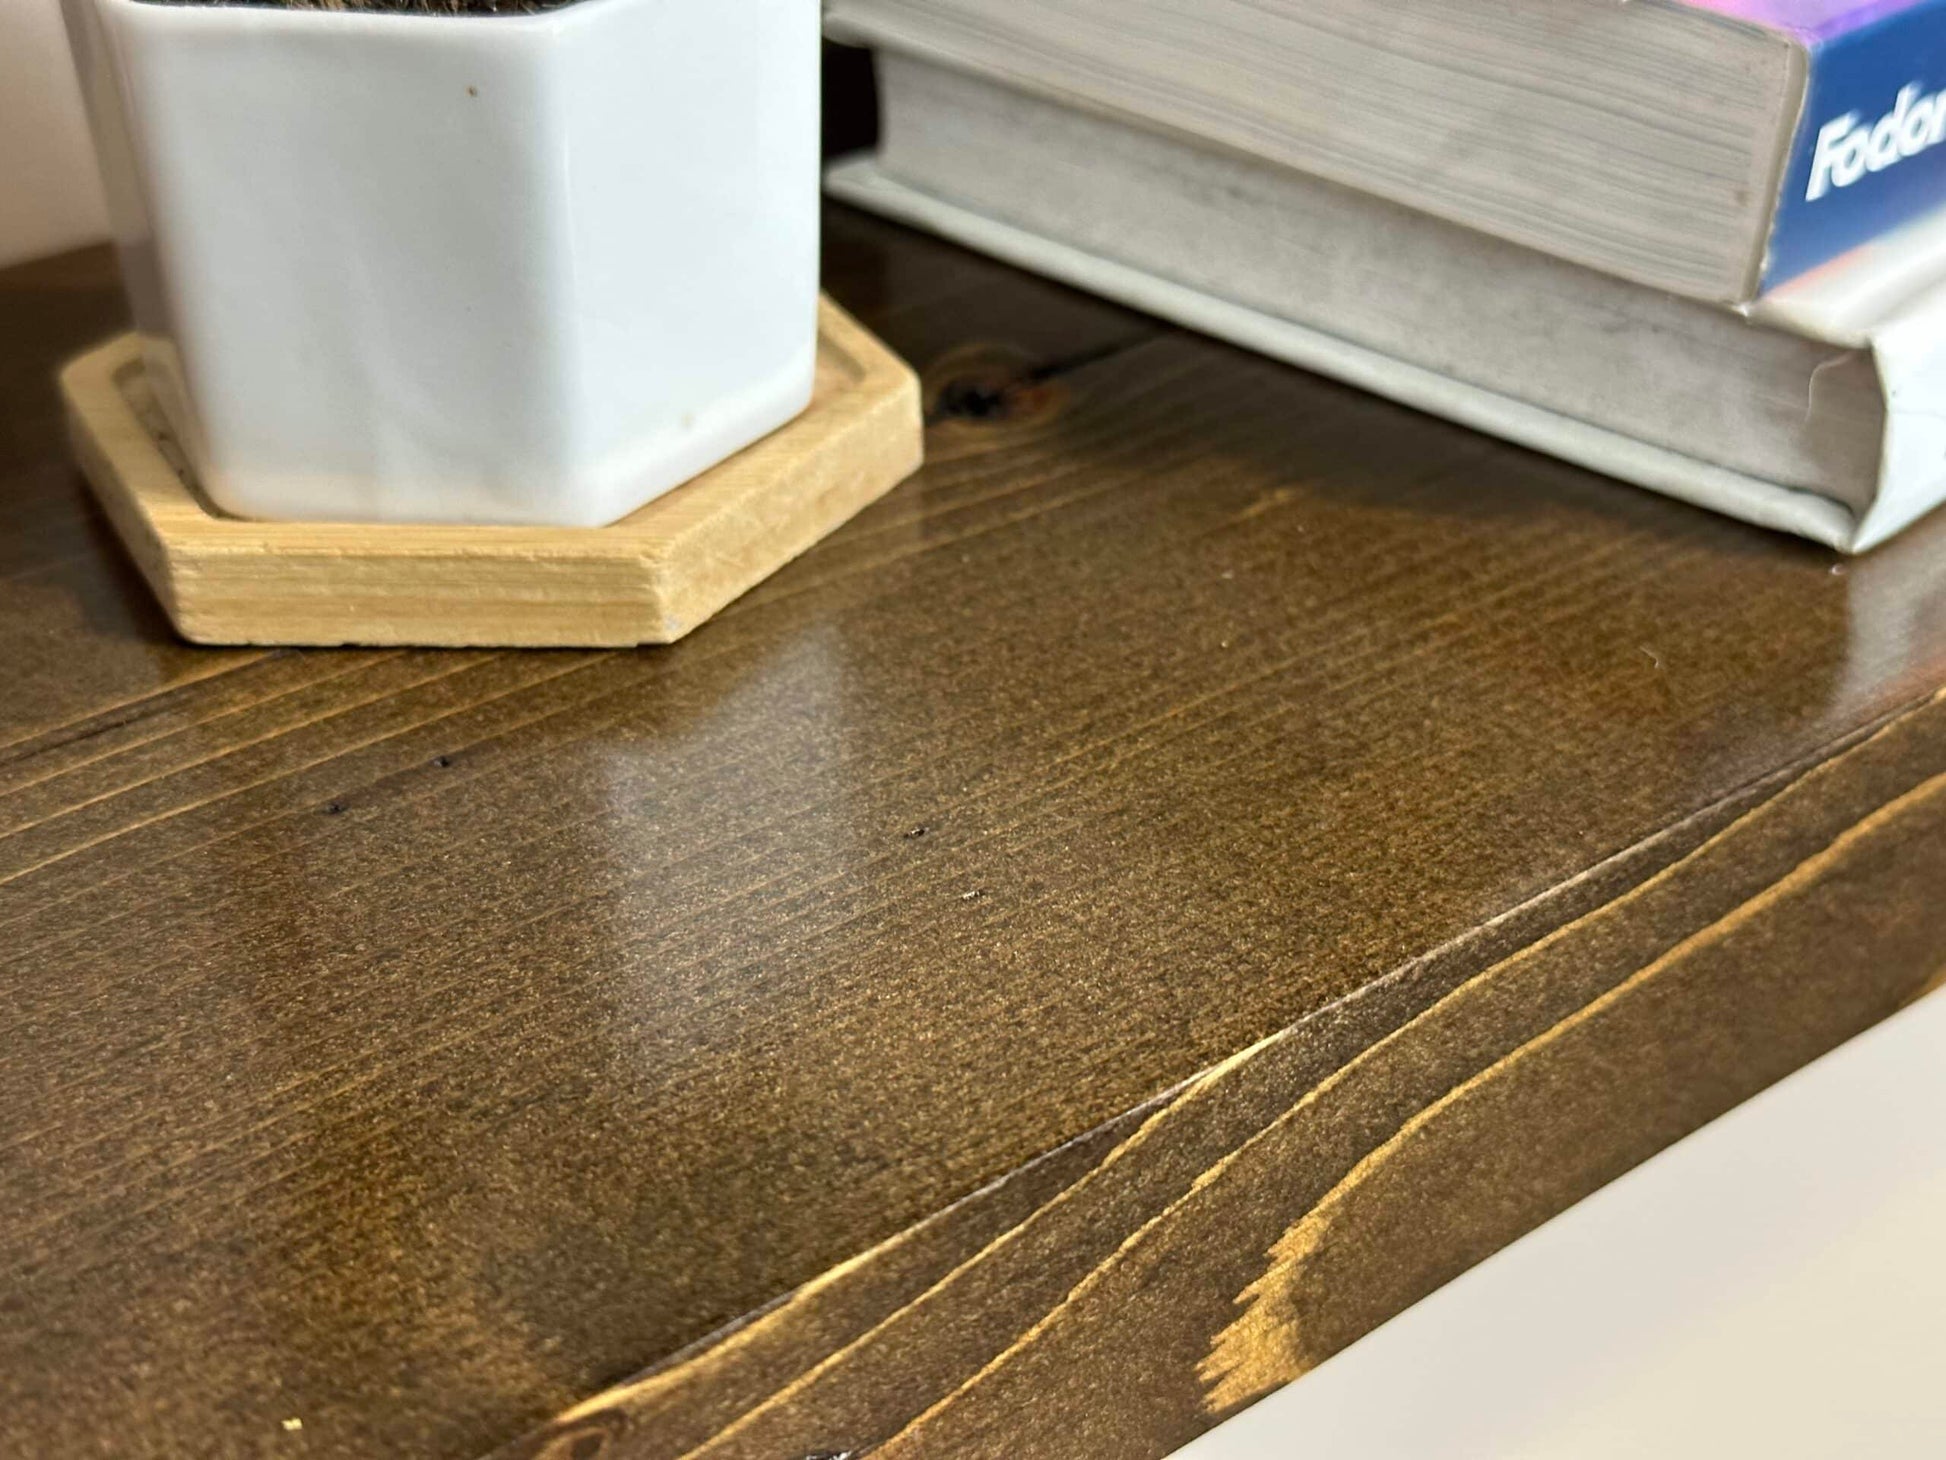 a close up of the finish on a reclaimed wood floating shelf in the contemporary collection. The lacquer application adds a shine and smoothness to the wood. Grain patterns are present and highlighted in the wood.